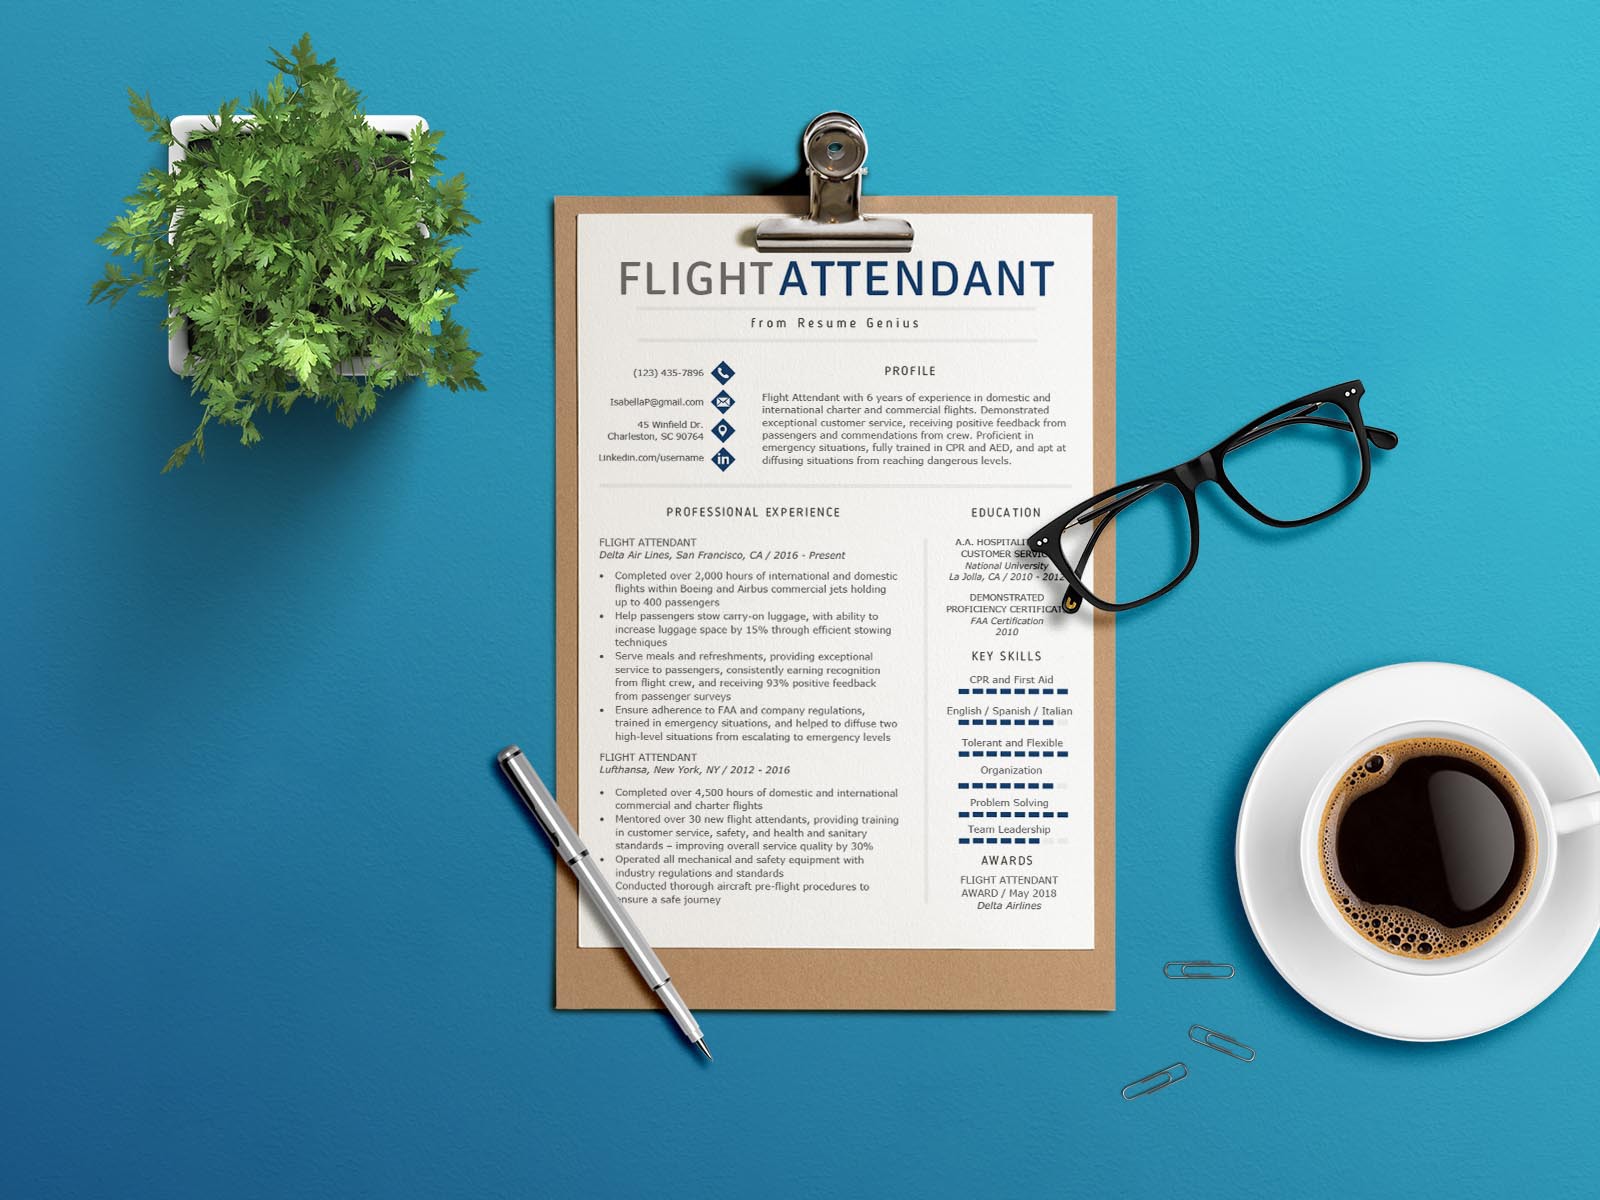 Free Flight Attendant Resume Template for Your Next Job Opportunity